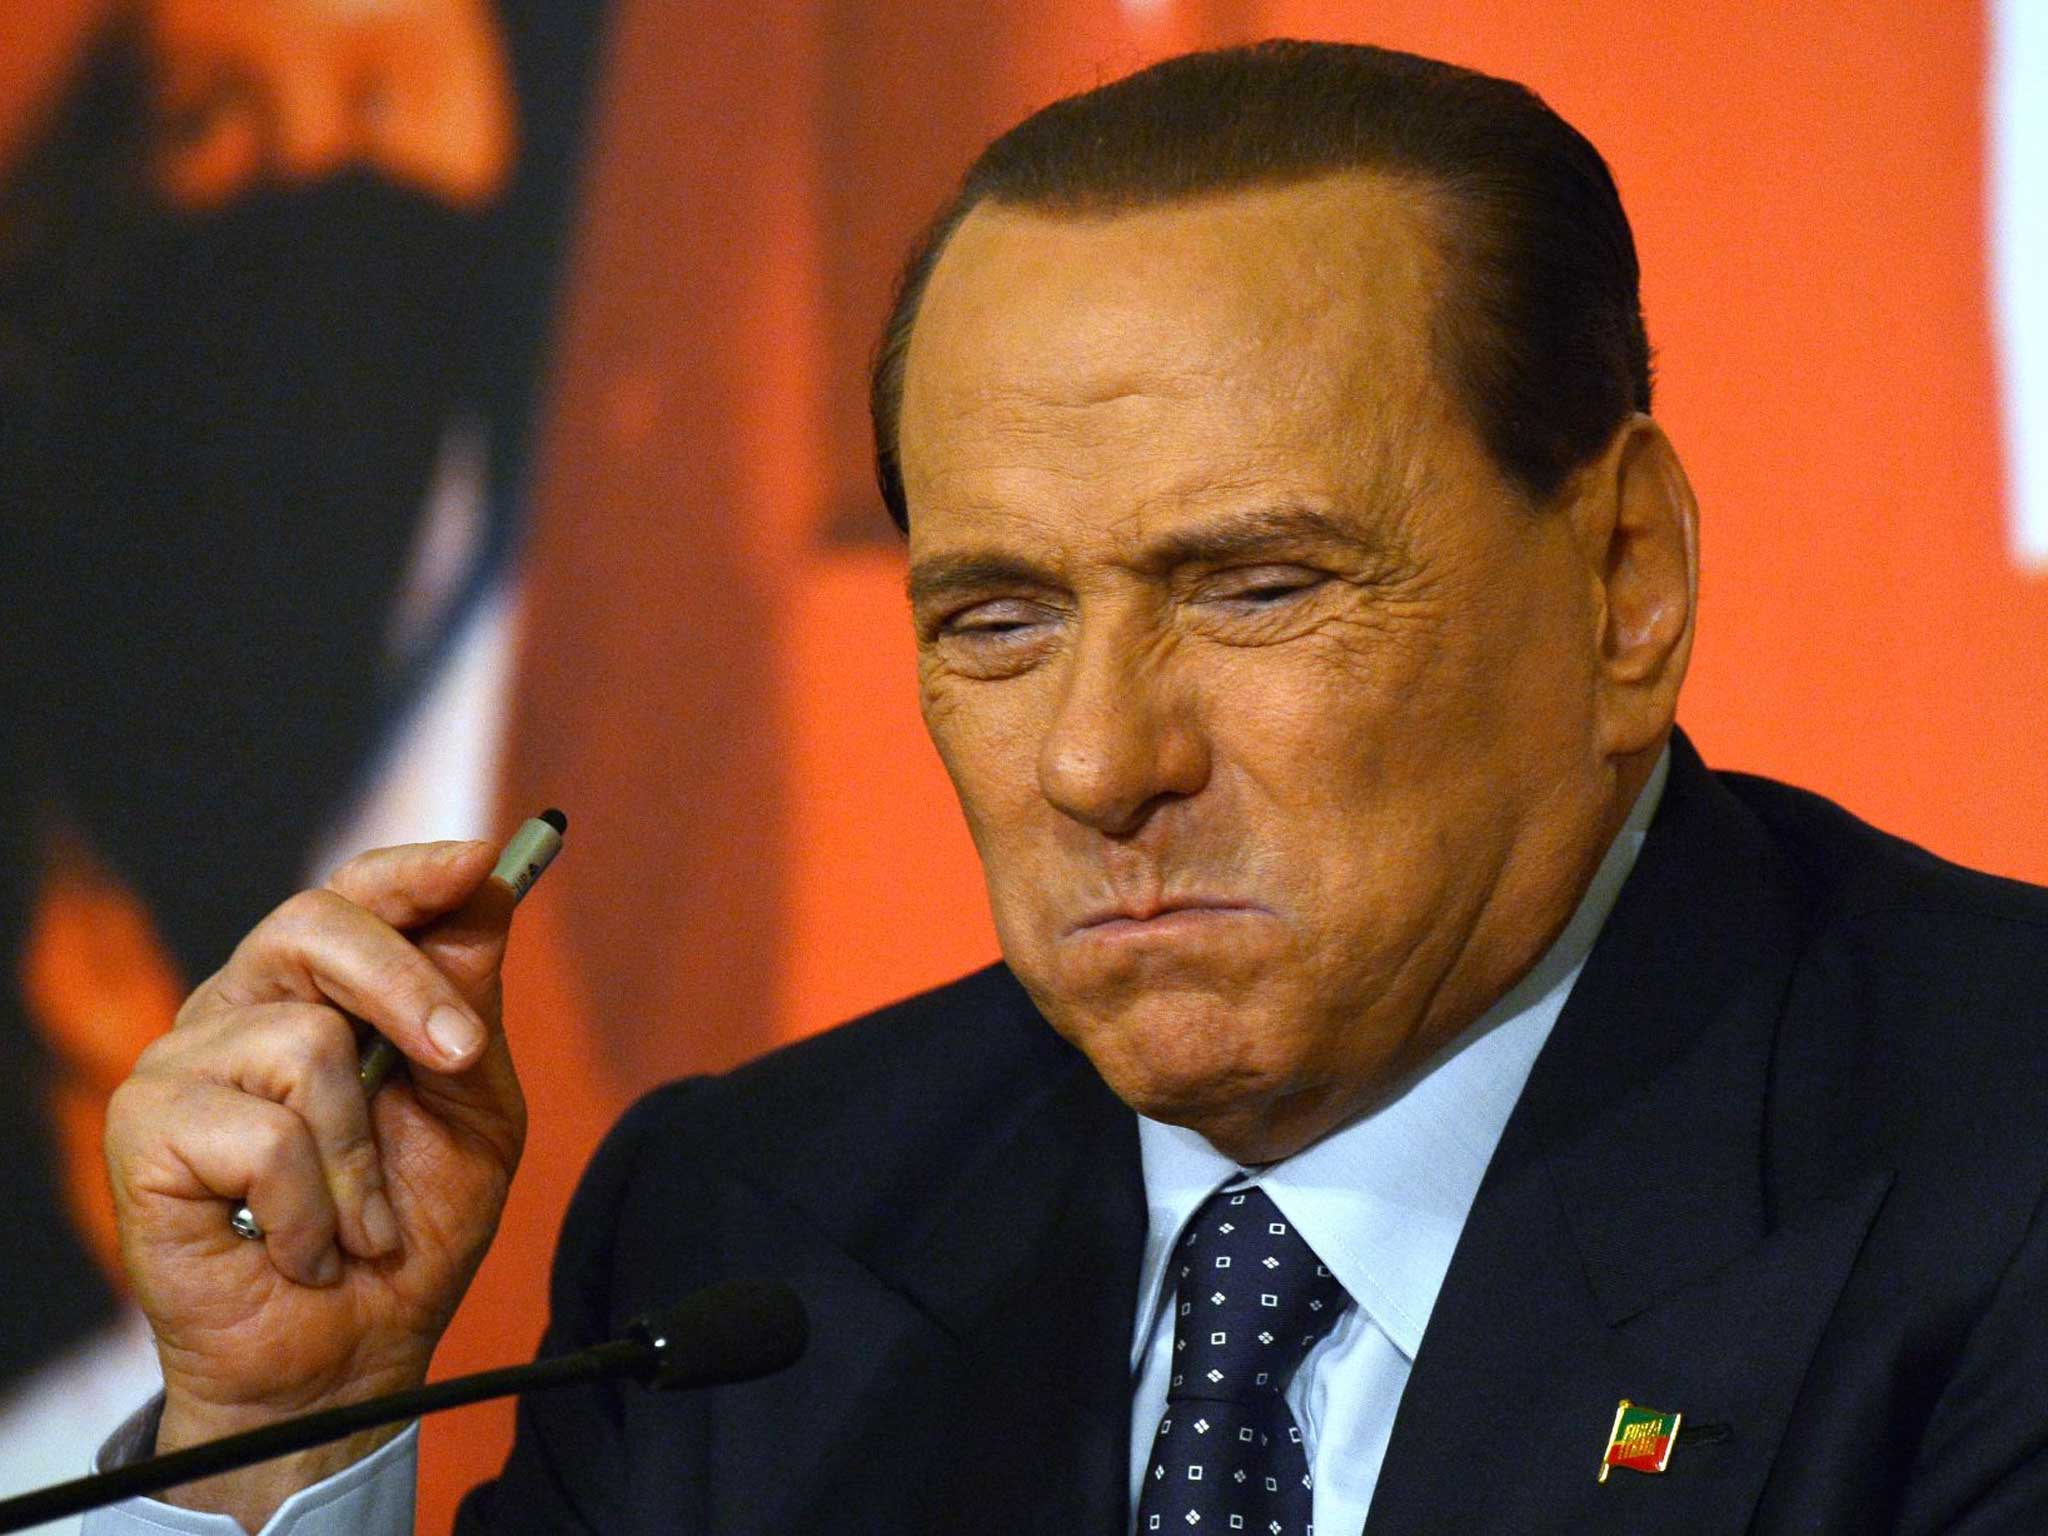 Italy's former prime minister Silvio Berlusconi speaks during a press conference